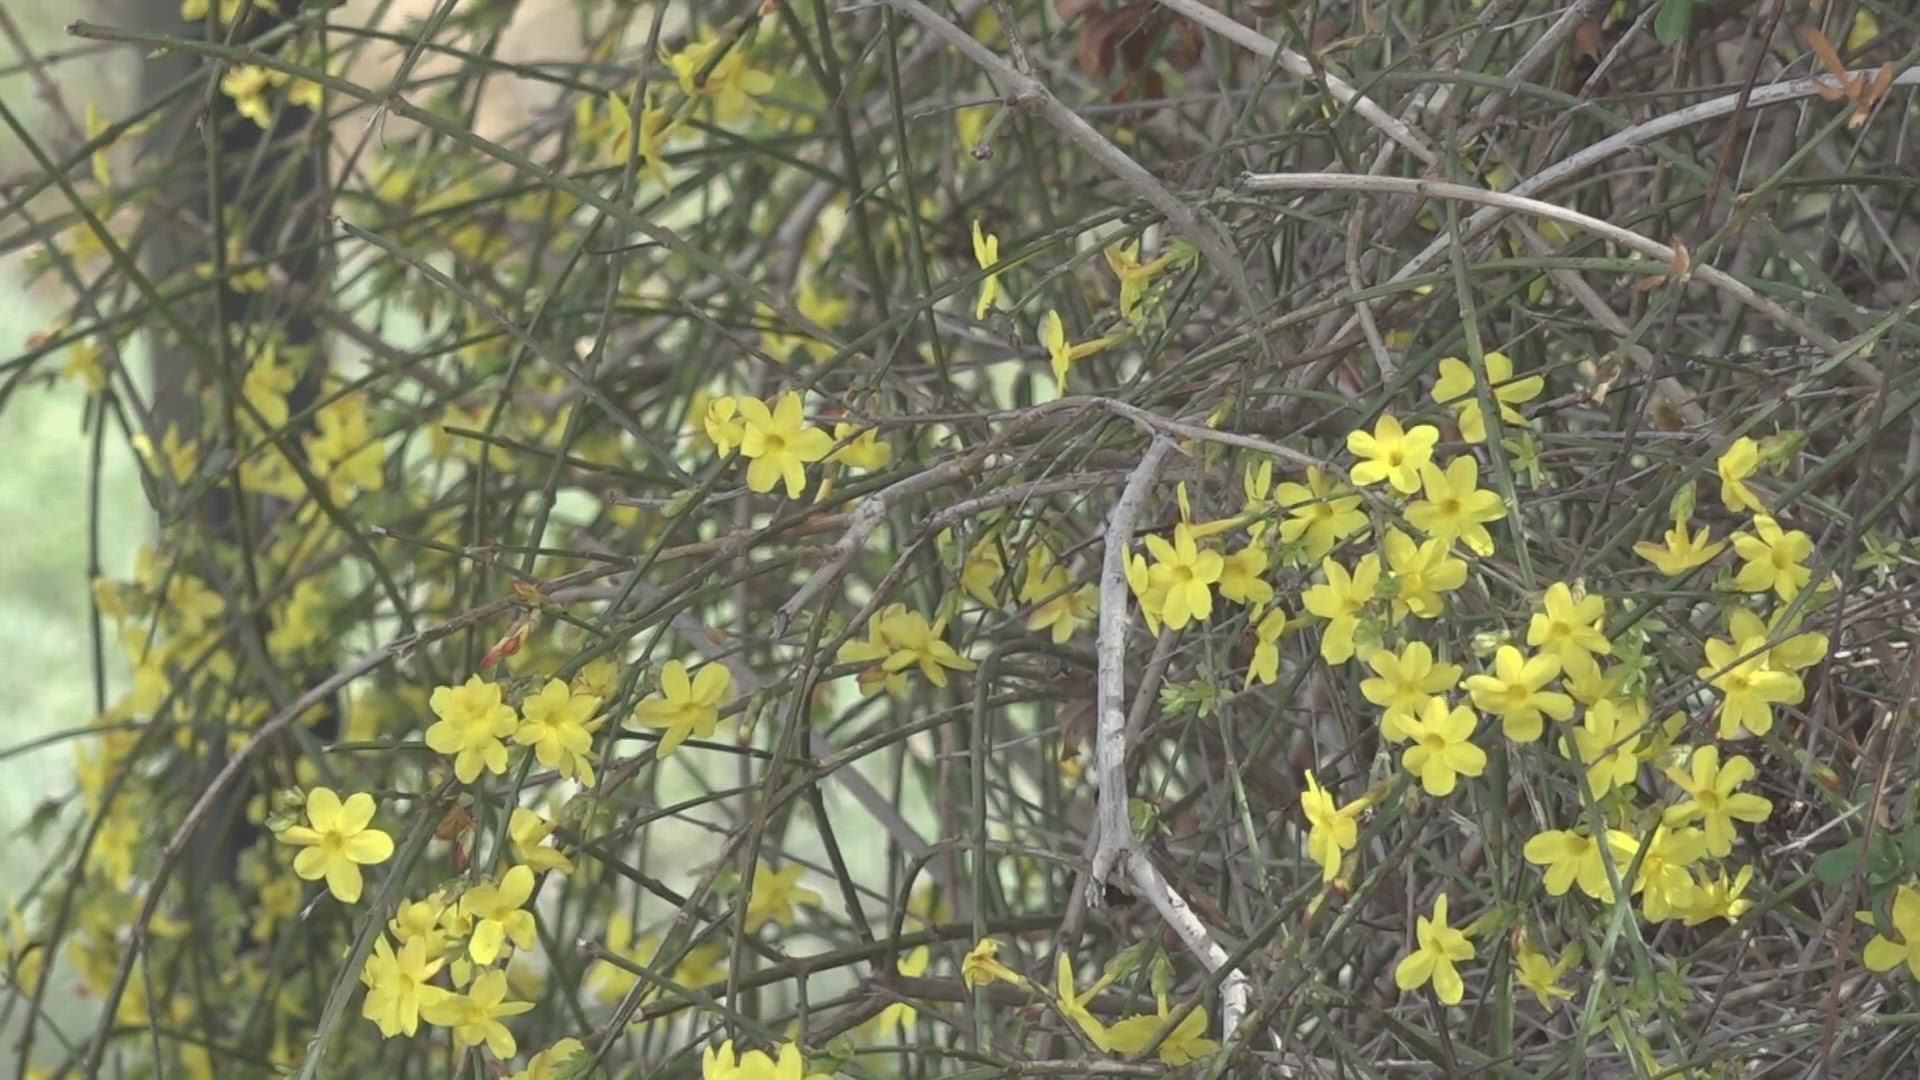 What are the effects of an early spring on nature in West Texas?